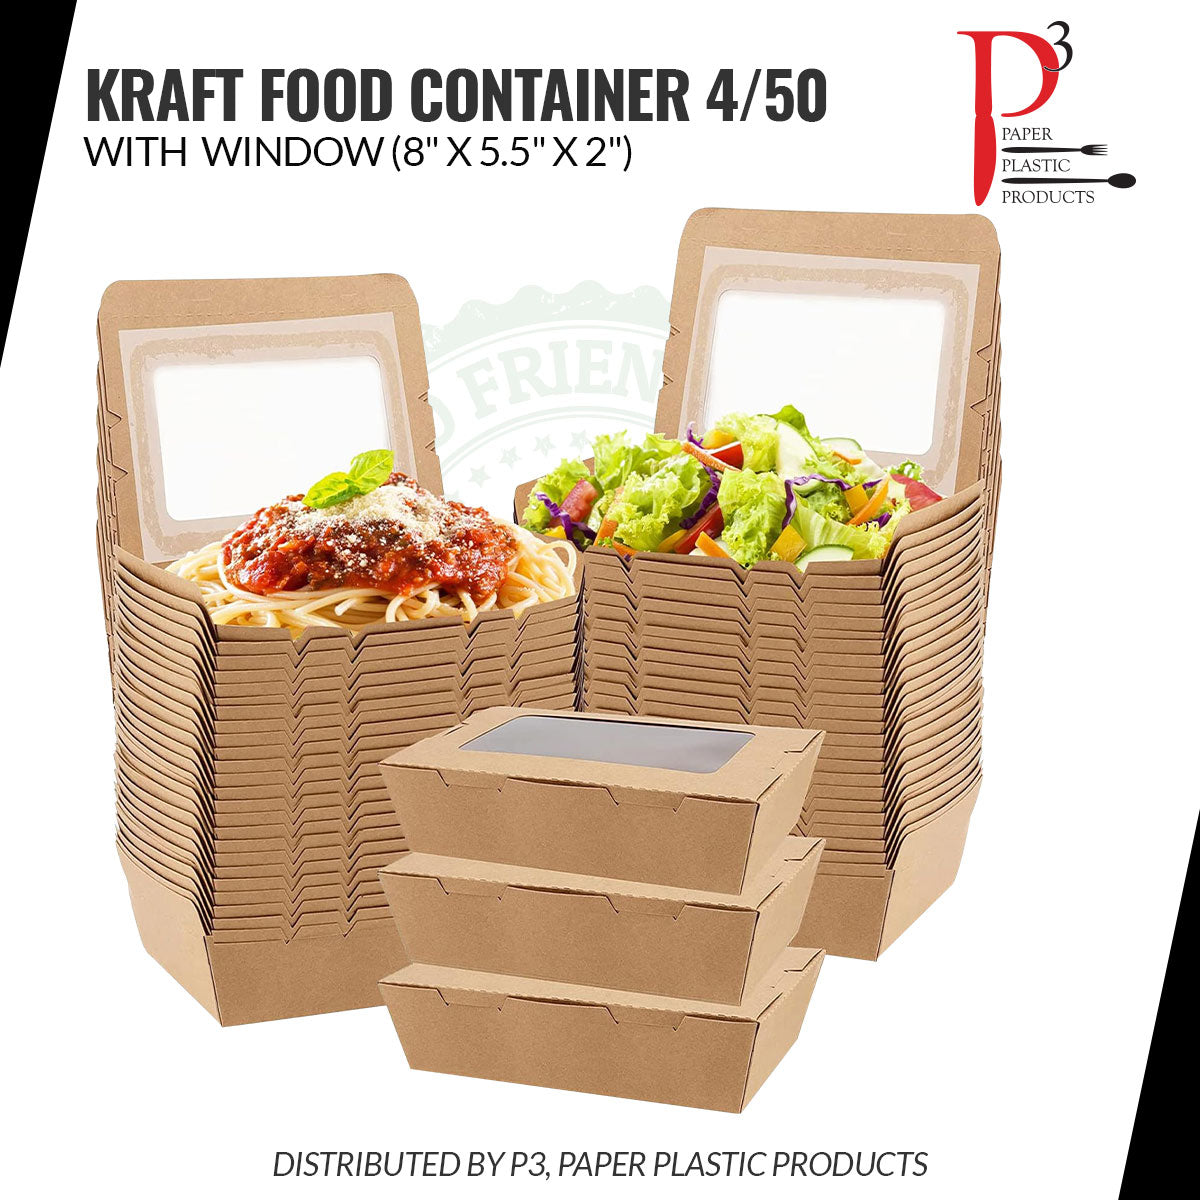 Kraft Food Container with window 8